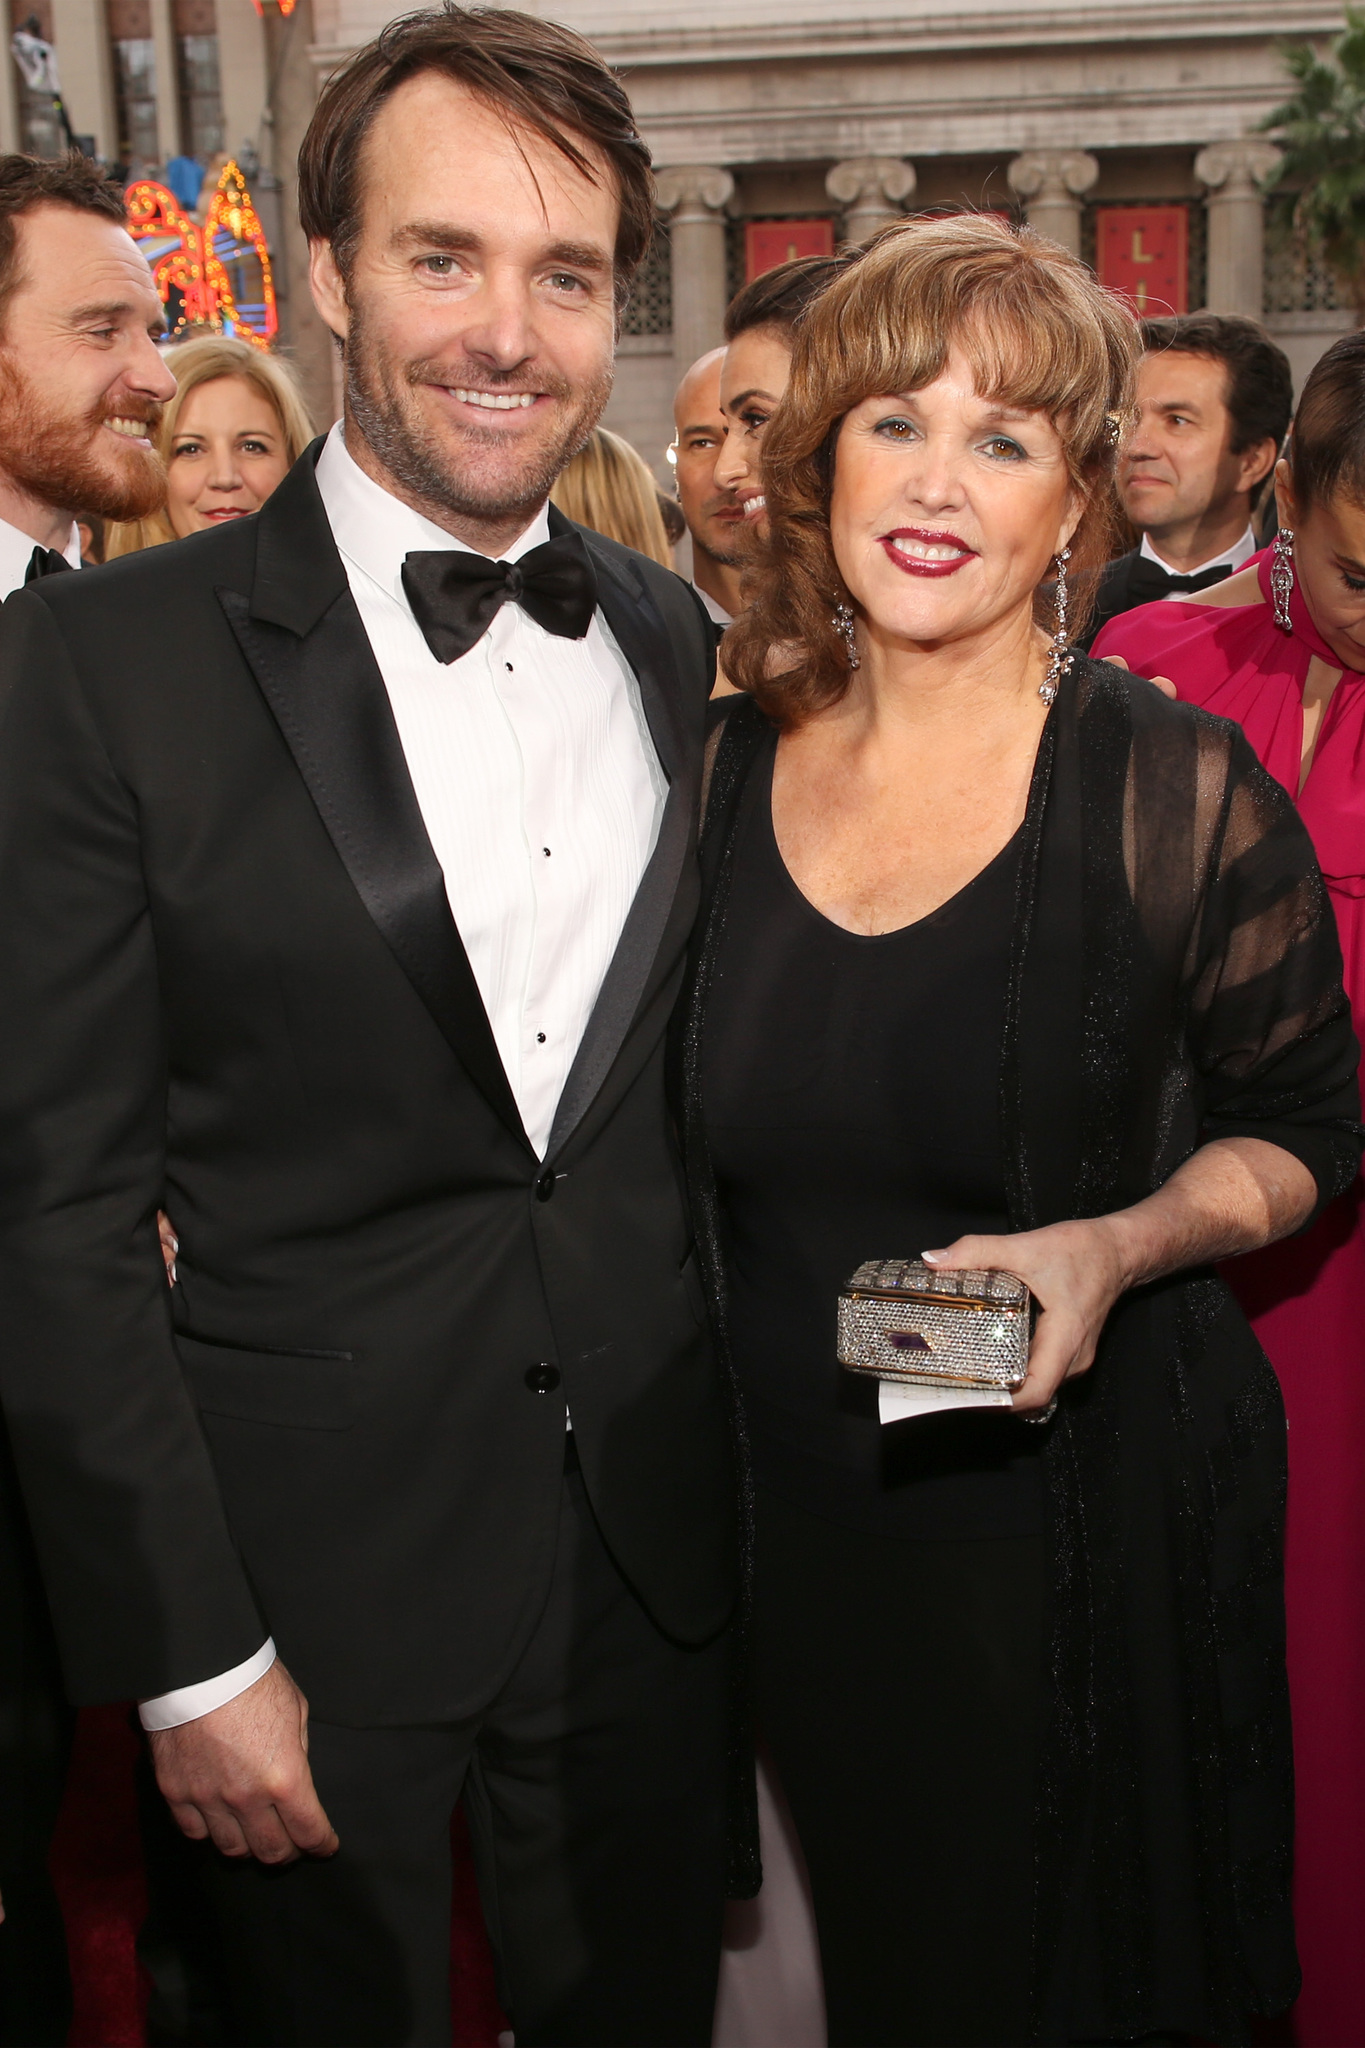 Actor Will Forte (L) and his mother Patricia Forte attend the Oscars at Hollywood & Highland Center on March 2, 2014 in Hollywood, California.